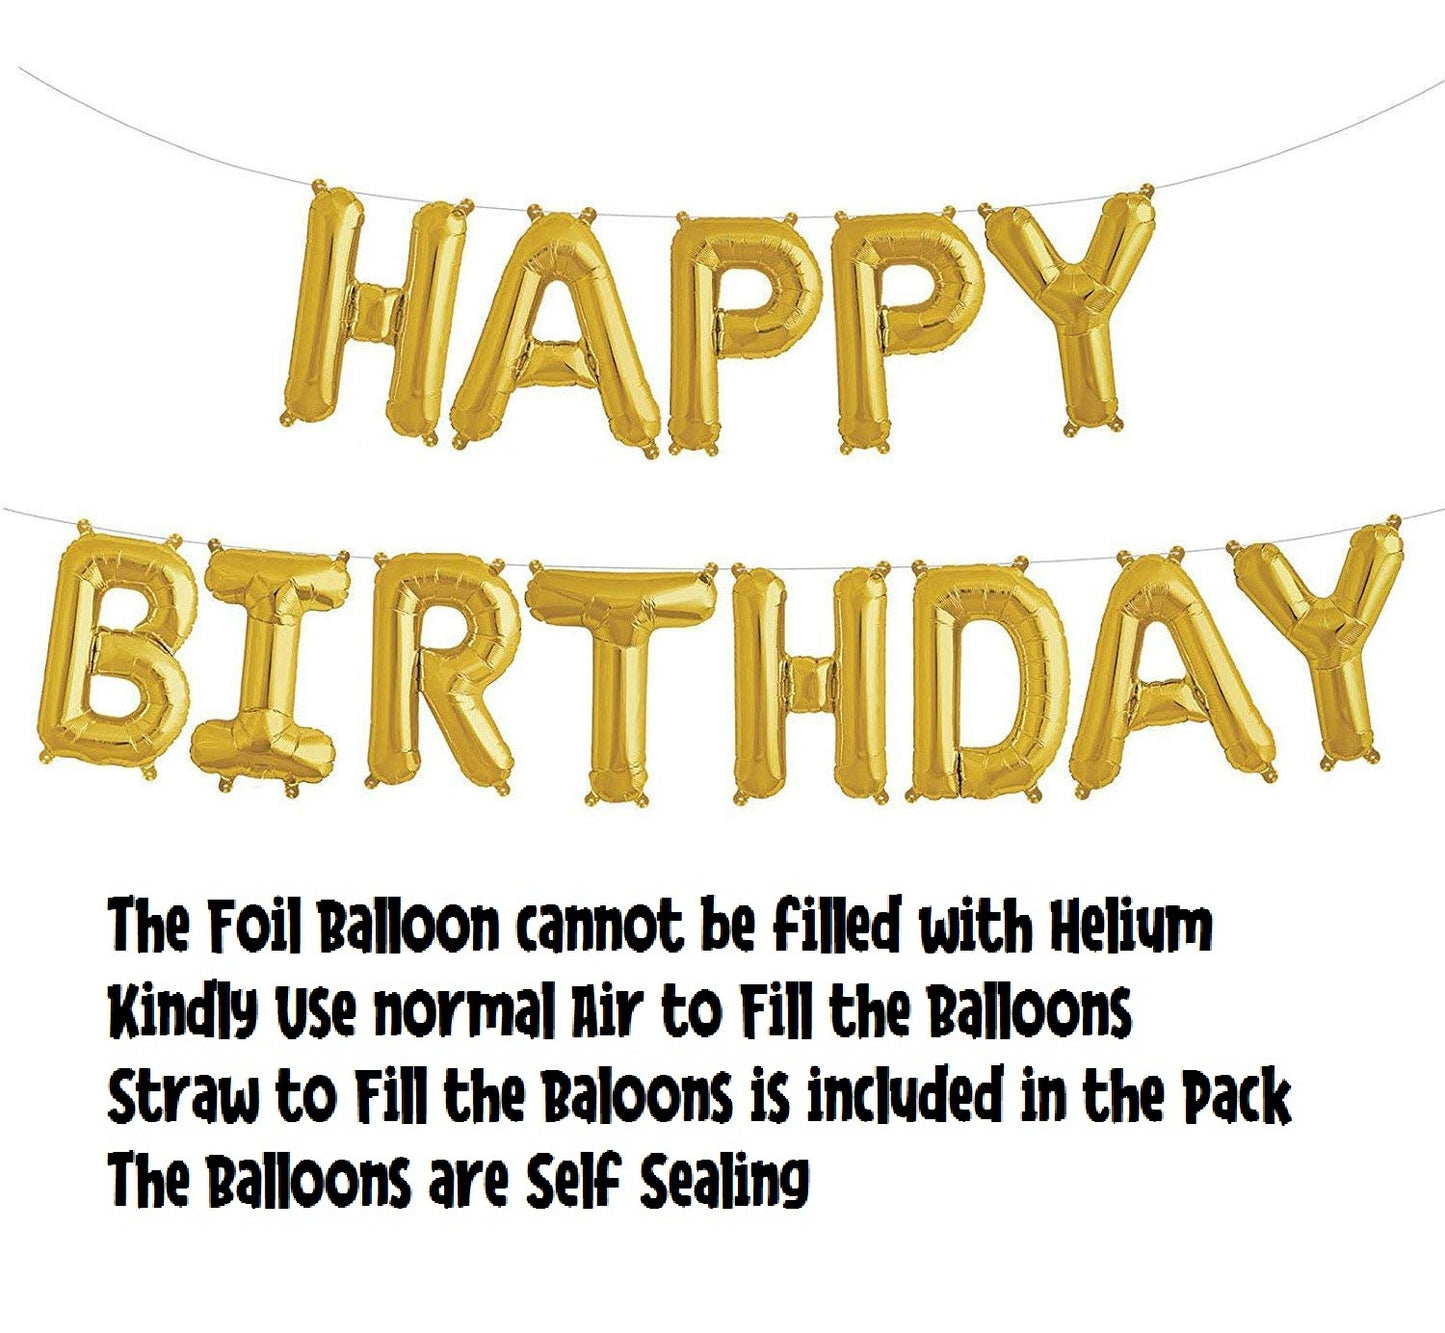 Happy 51st Birthday Foil Balloon Combo Party Decoration for Anniversary Celebration 16 Inches